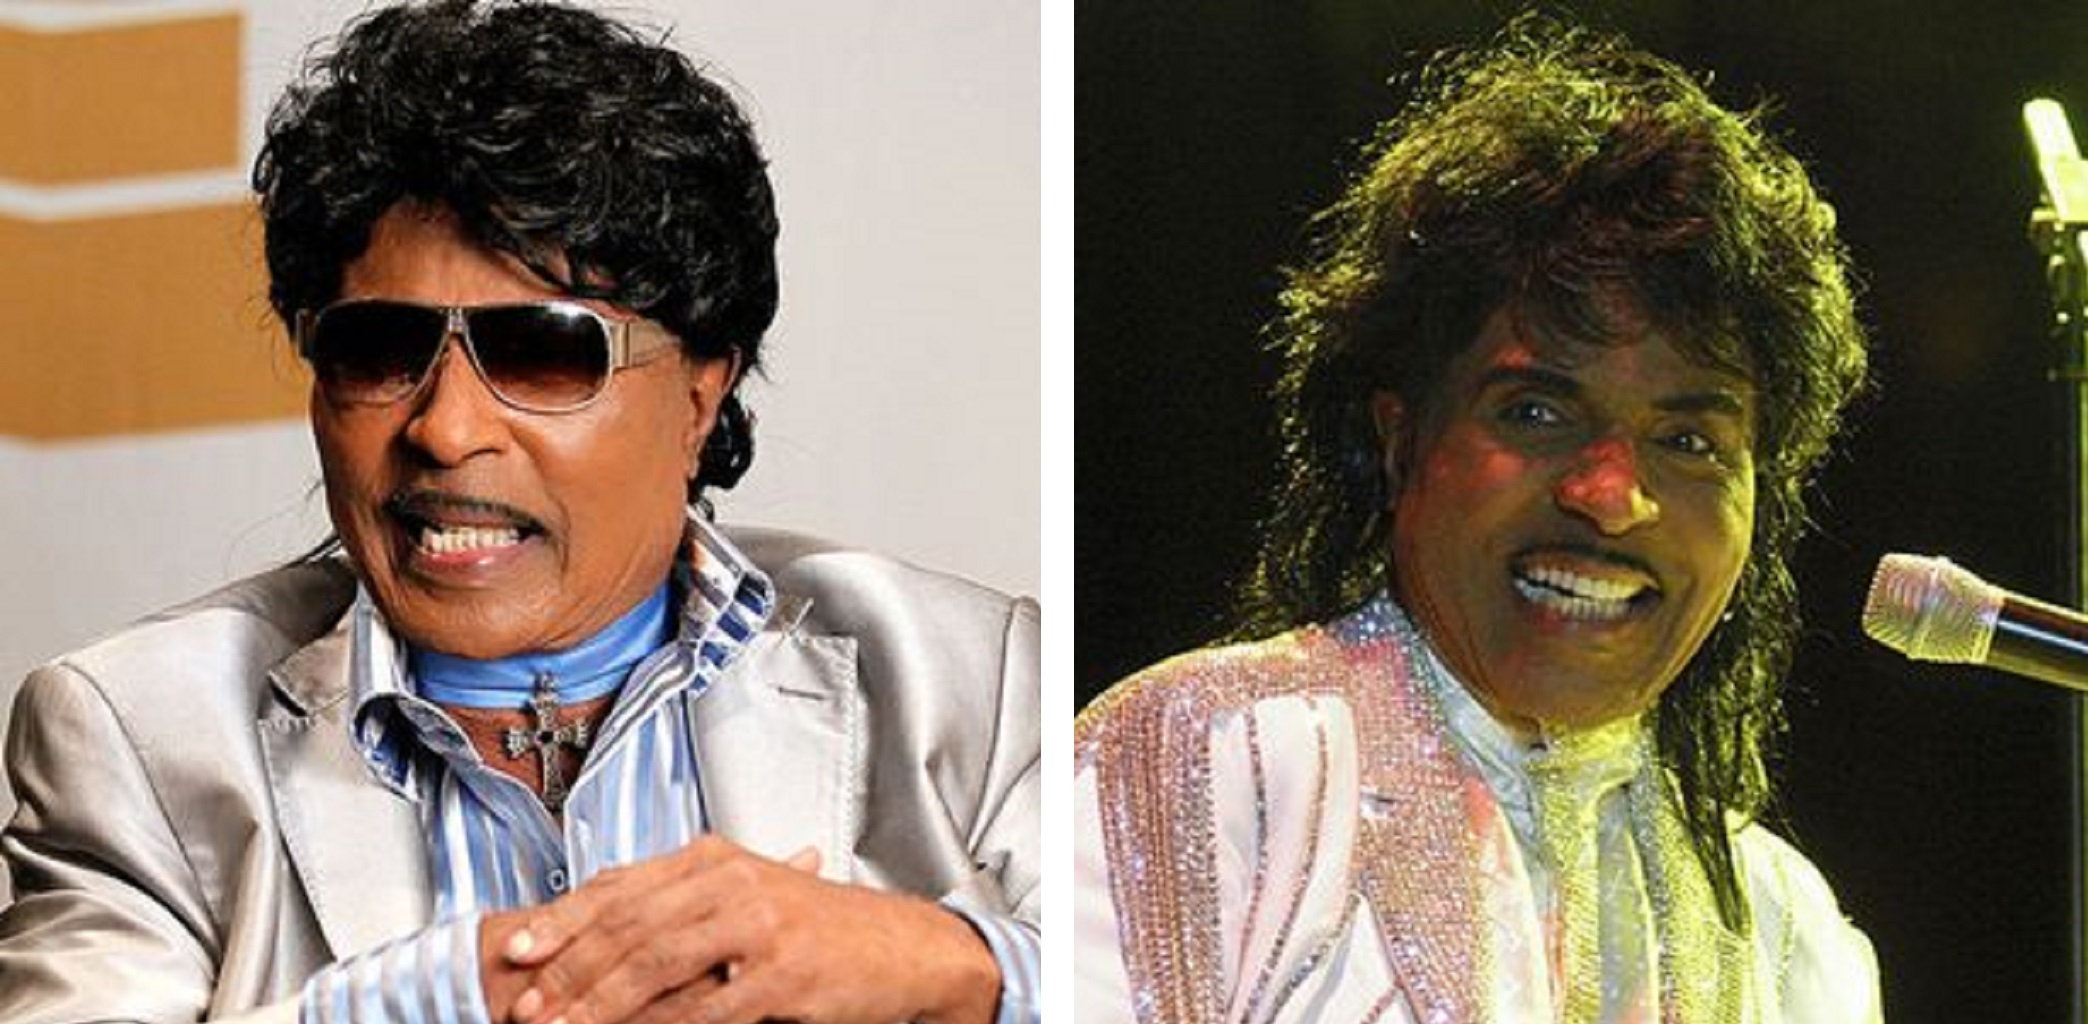 Music Legend Little Richard Has Died at Age 87